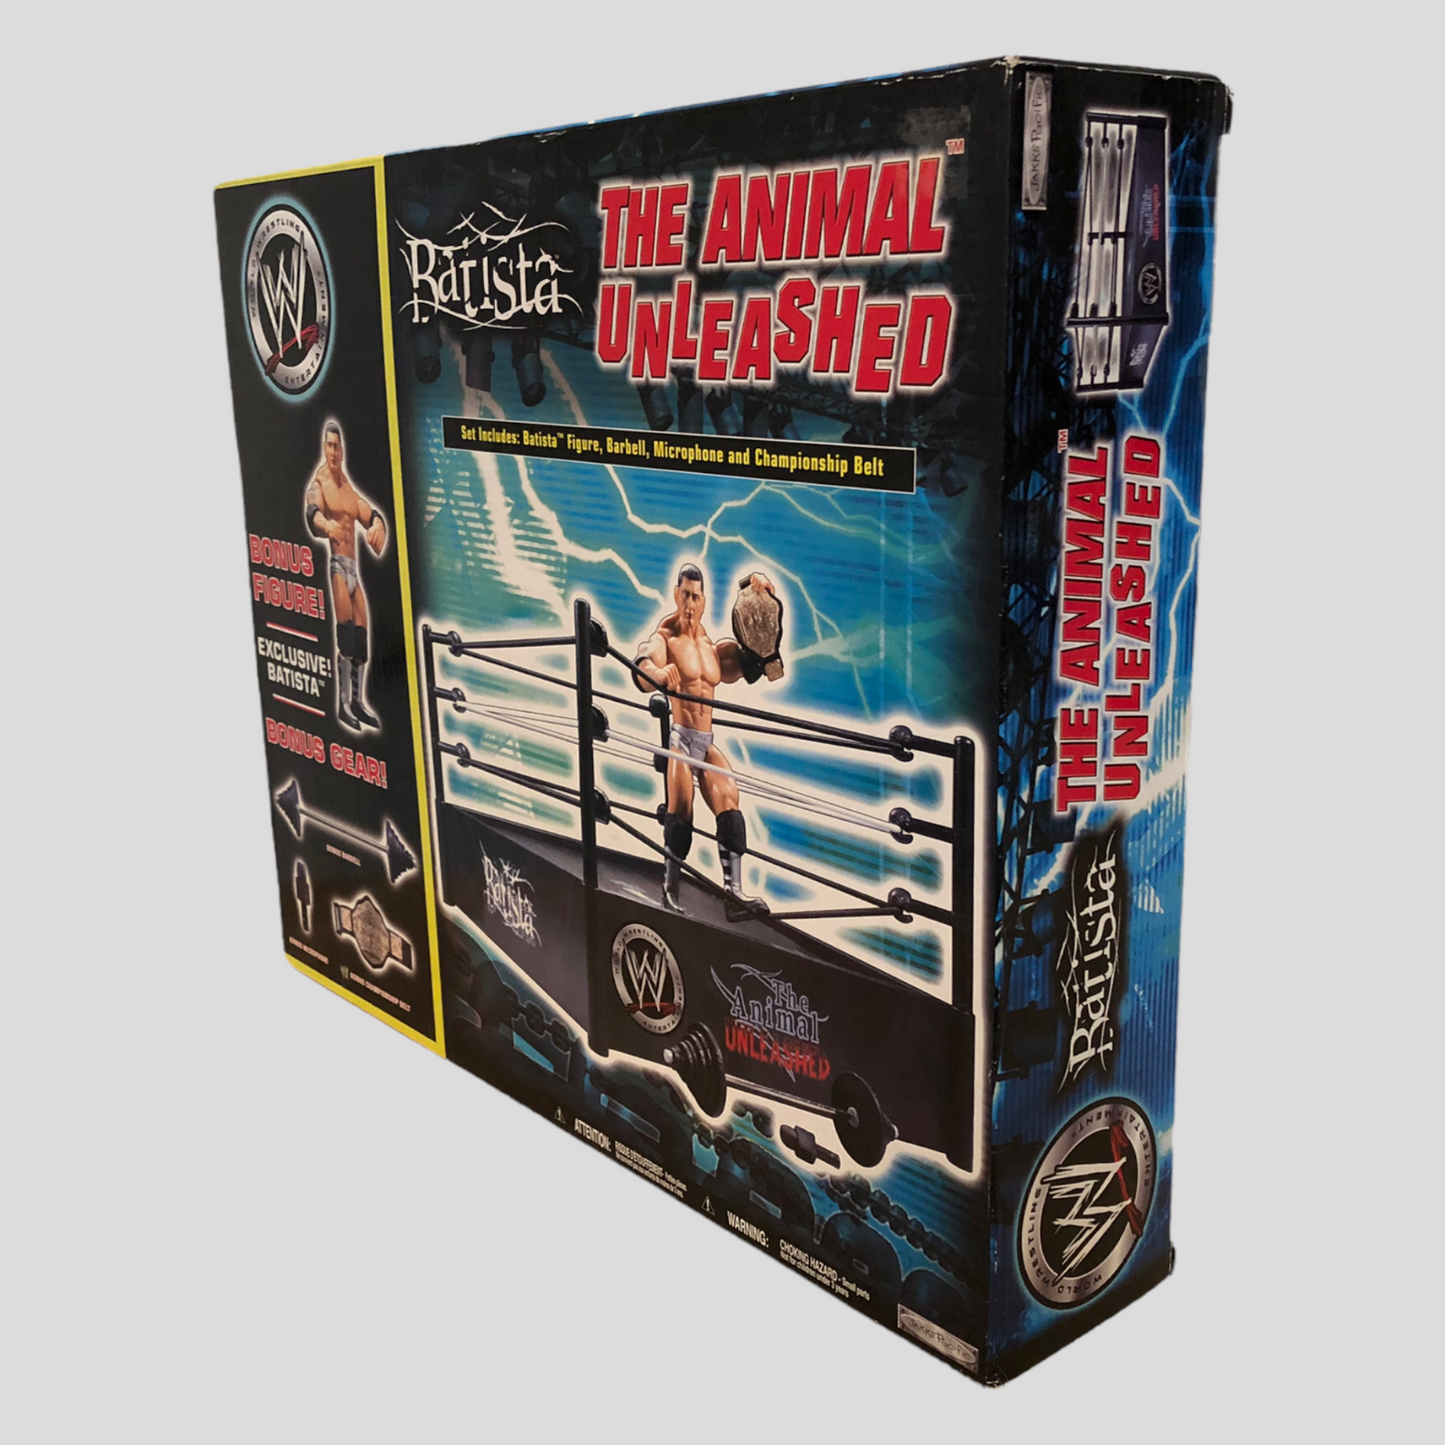 2006 WWE Jakks Pacific The Animal Unleashed Ring [With Batista]